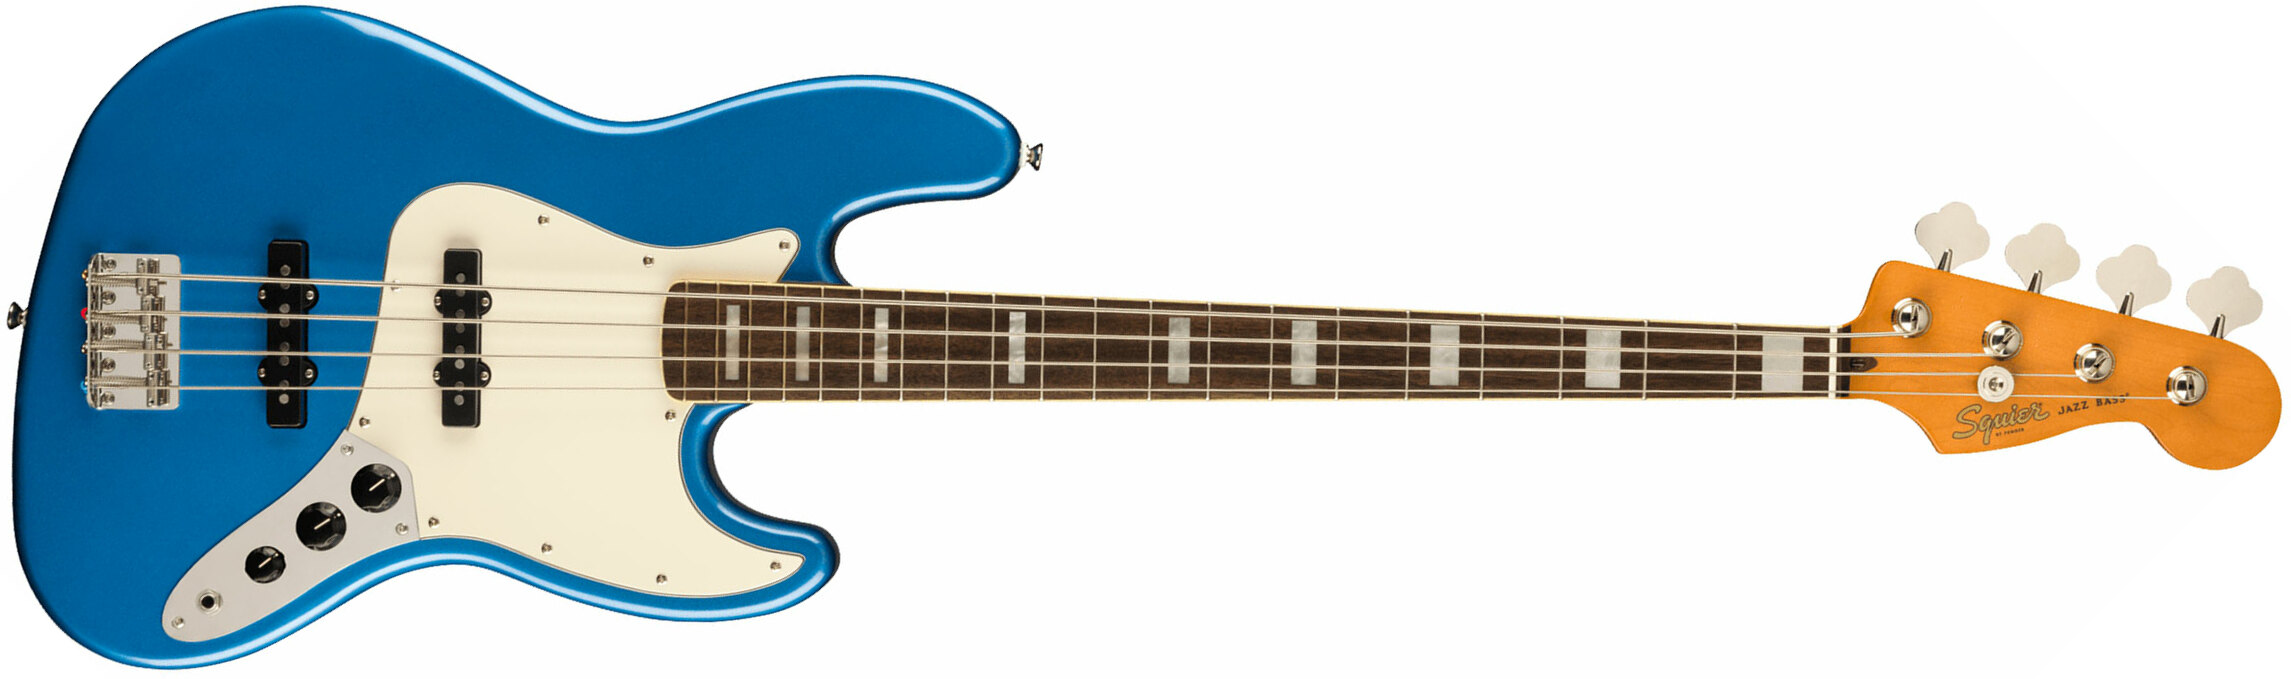 Squier Jazz Bass Classic Vibe '60s Fsr Ltd Lau - Lake Placid Blue - Solid body electric bass - Main picture